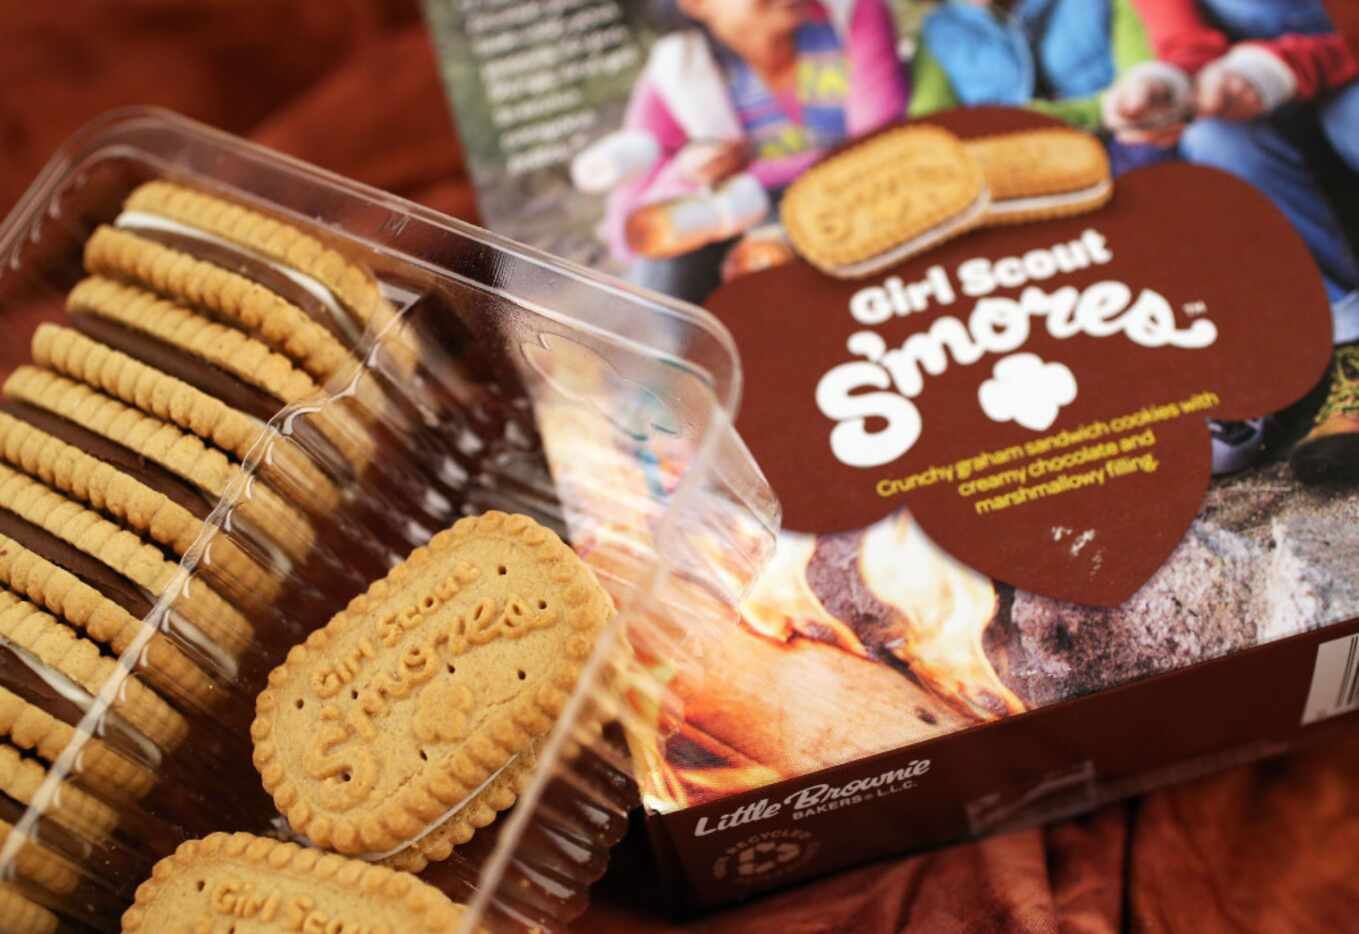 The Girl Scouts of the USA launched S'mores in recognition of the organization's 100th year...